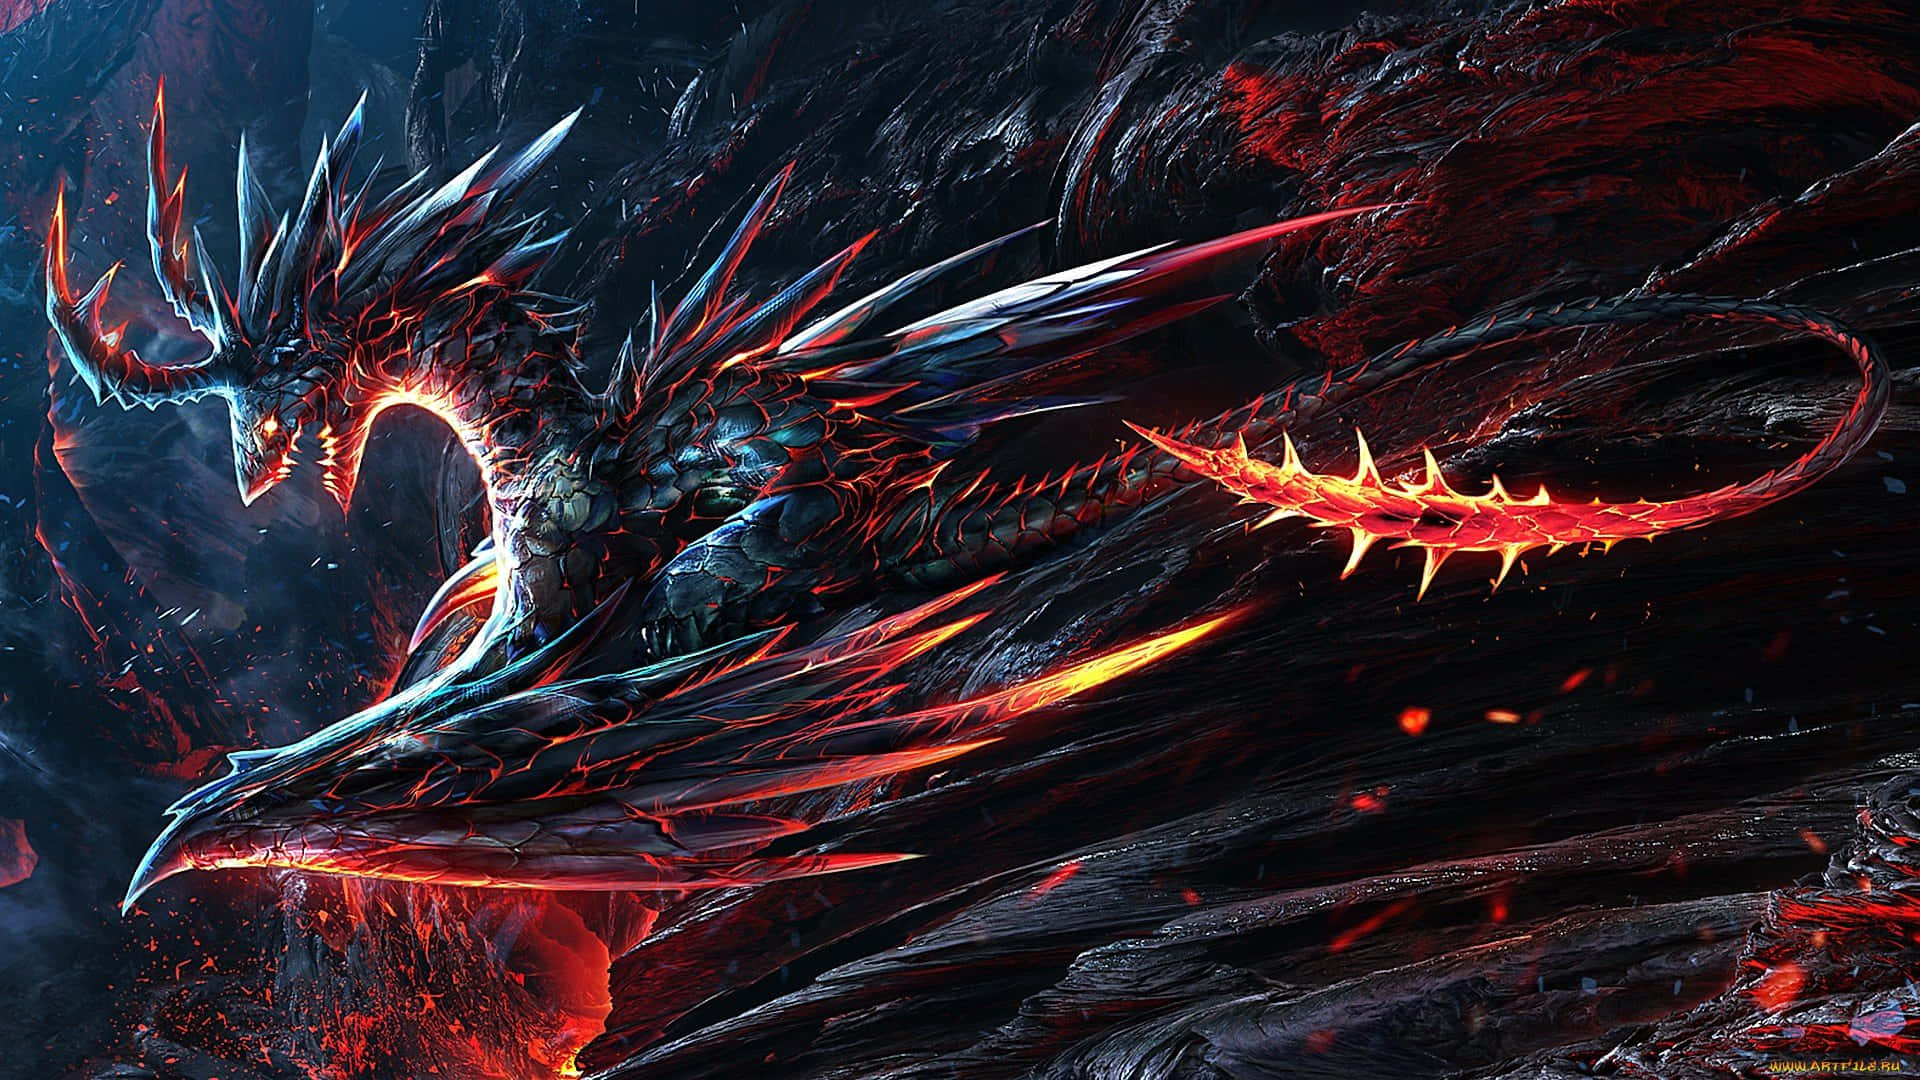 "An Unbelievably Awesome Dragon" Wallpaper